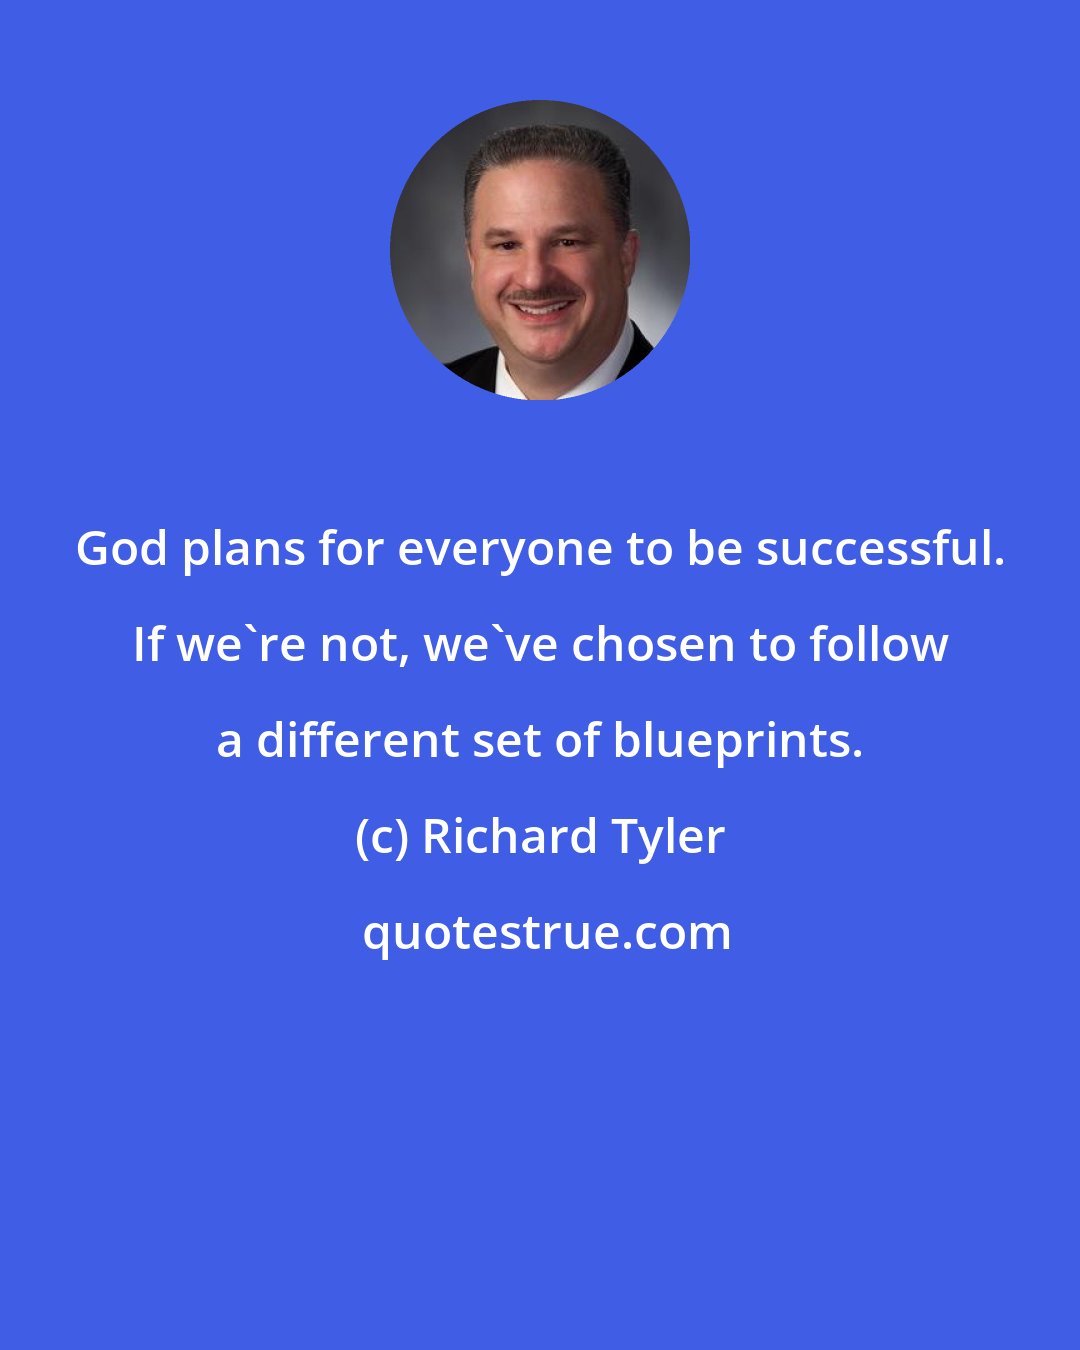 Richard Tyler: God plans for everyone to be successful. If we're not, we've chosen to follow a different set of blueprints.